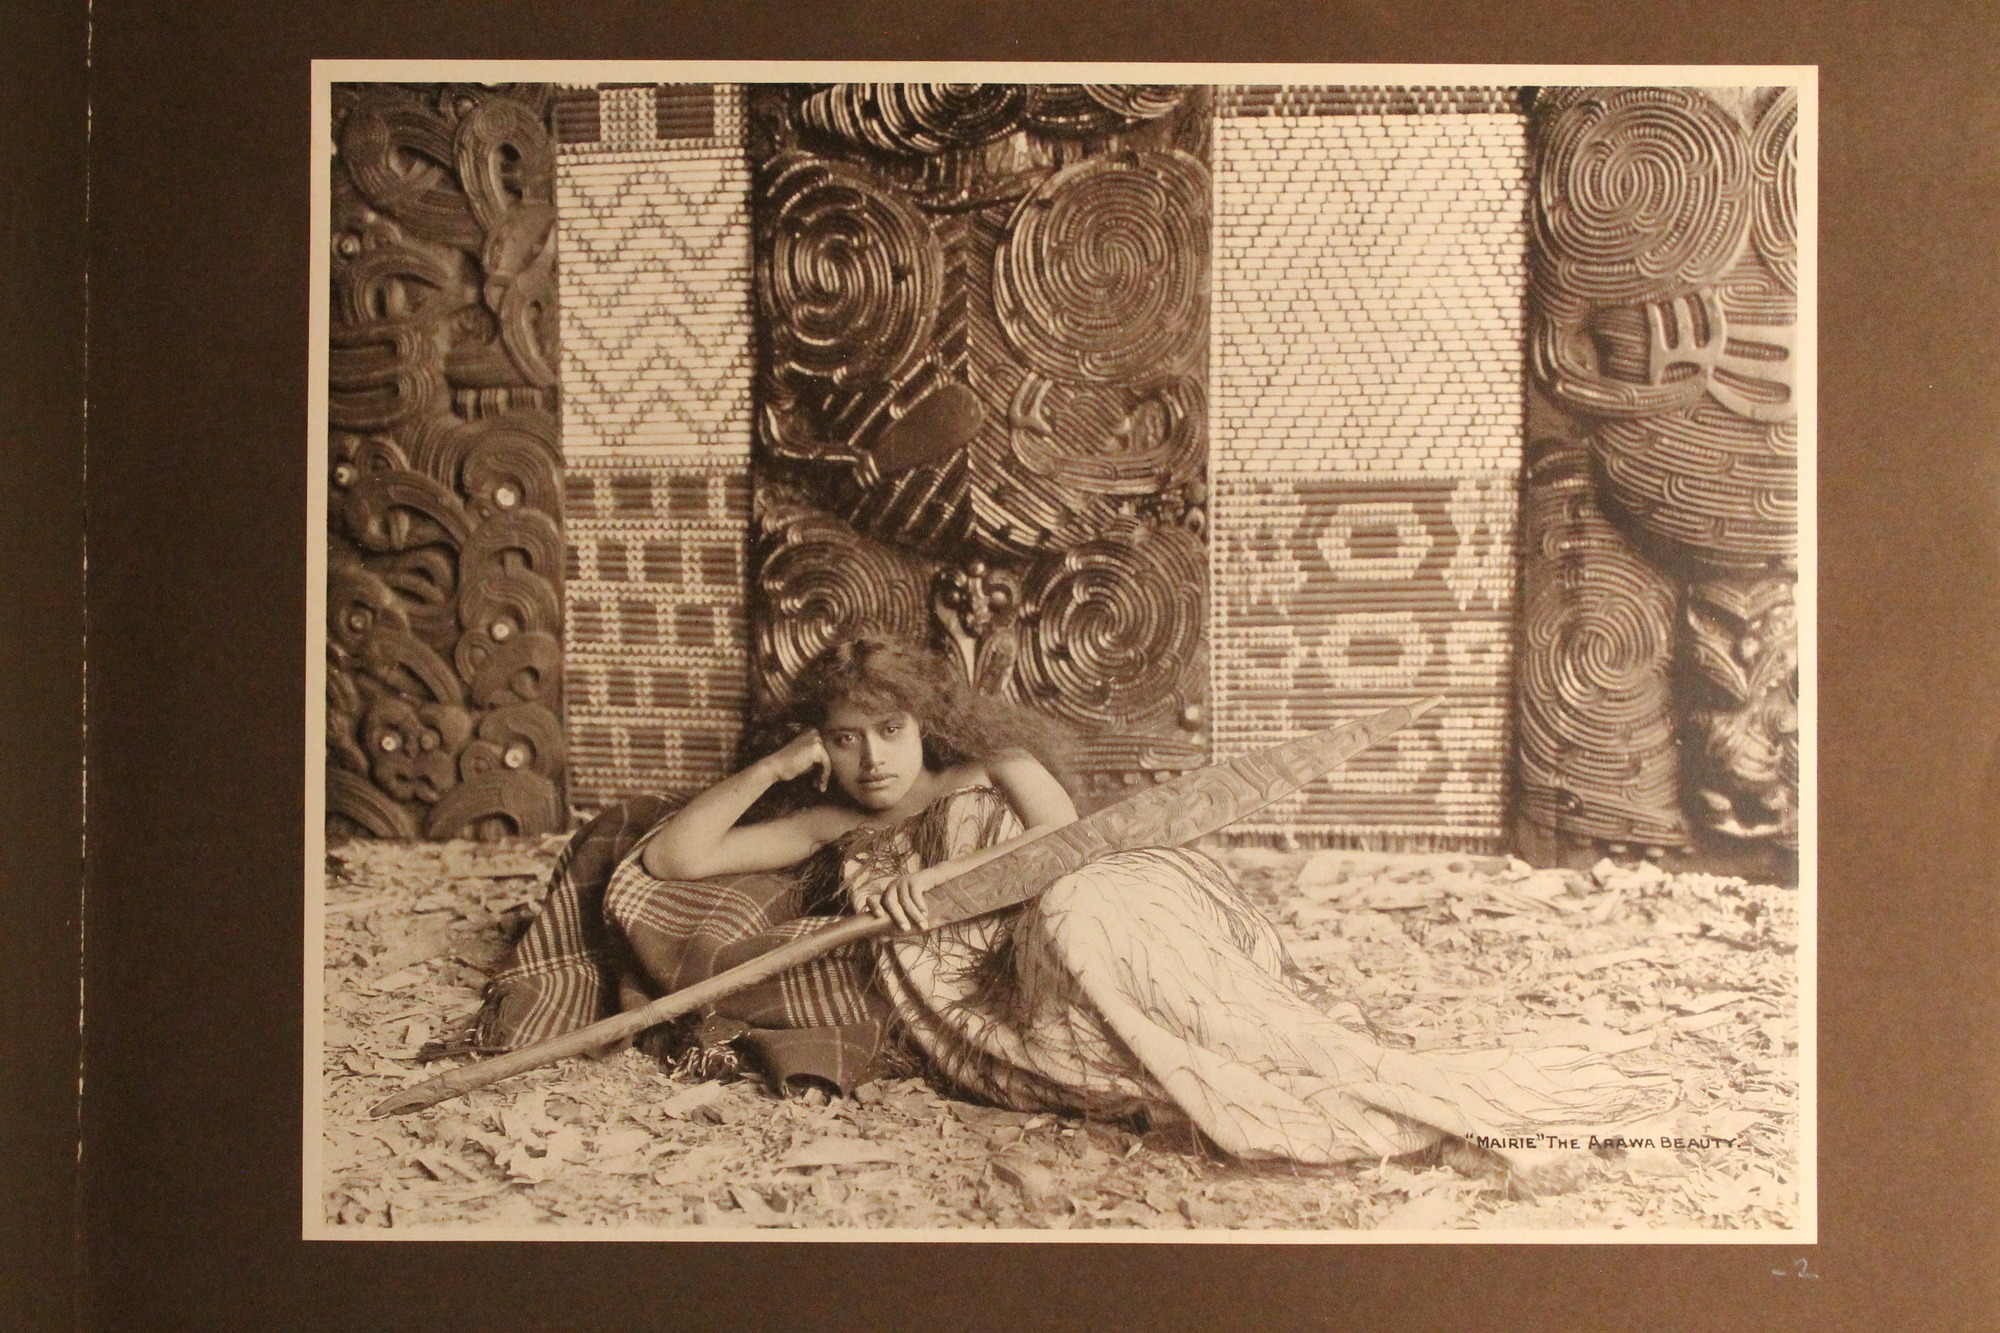 A Maori girl reclines on a plaid blanket within an elaborately carved interior.